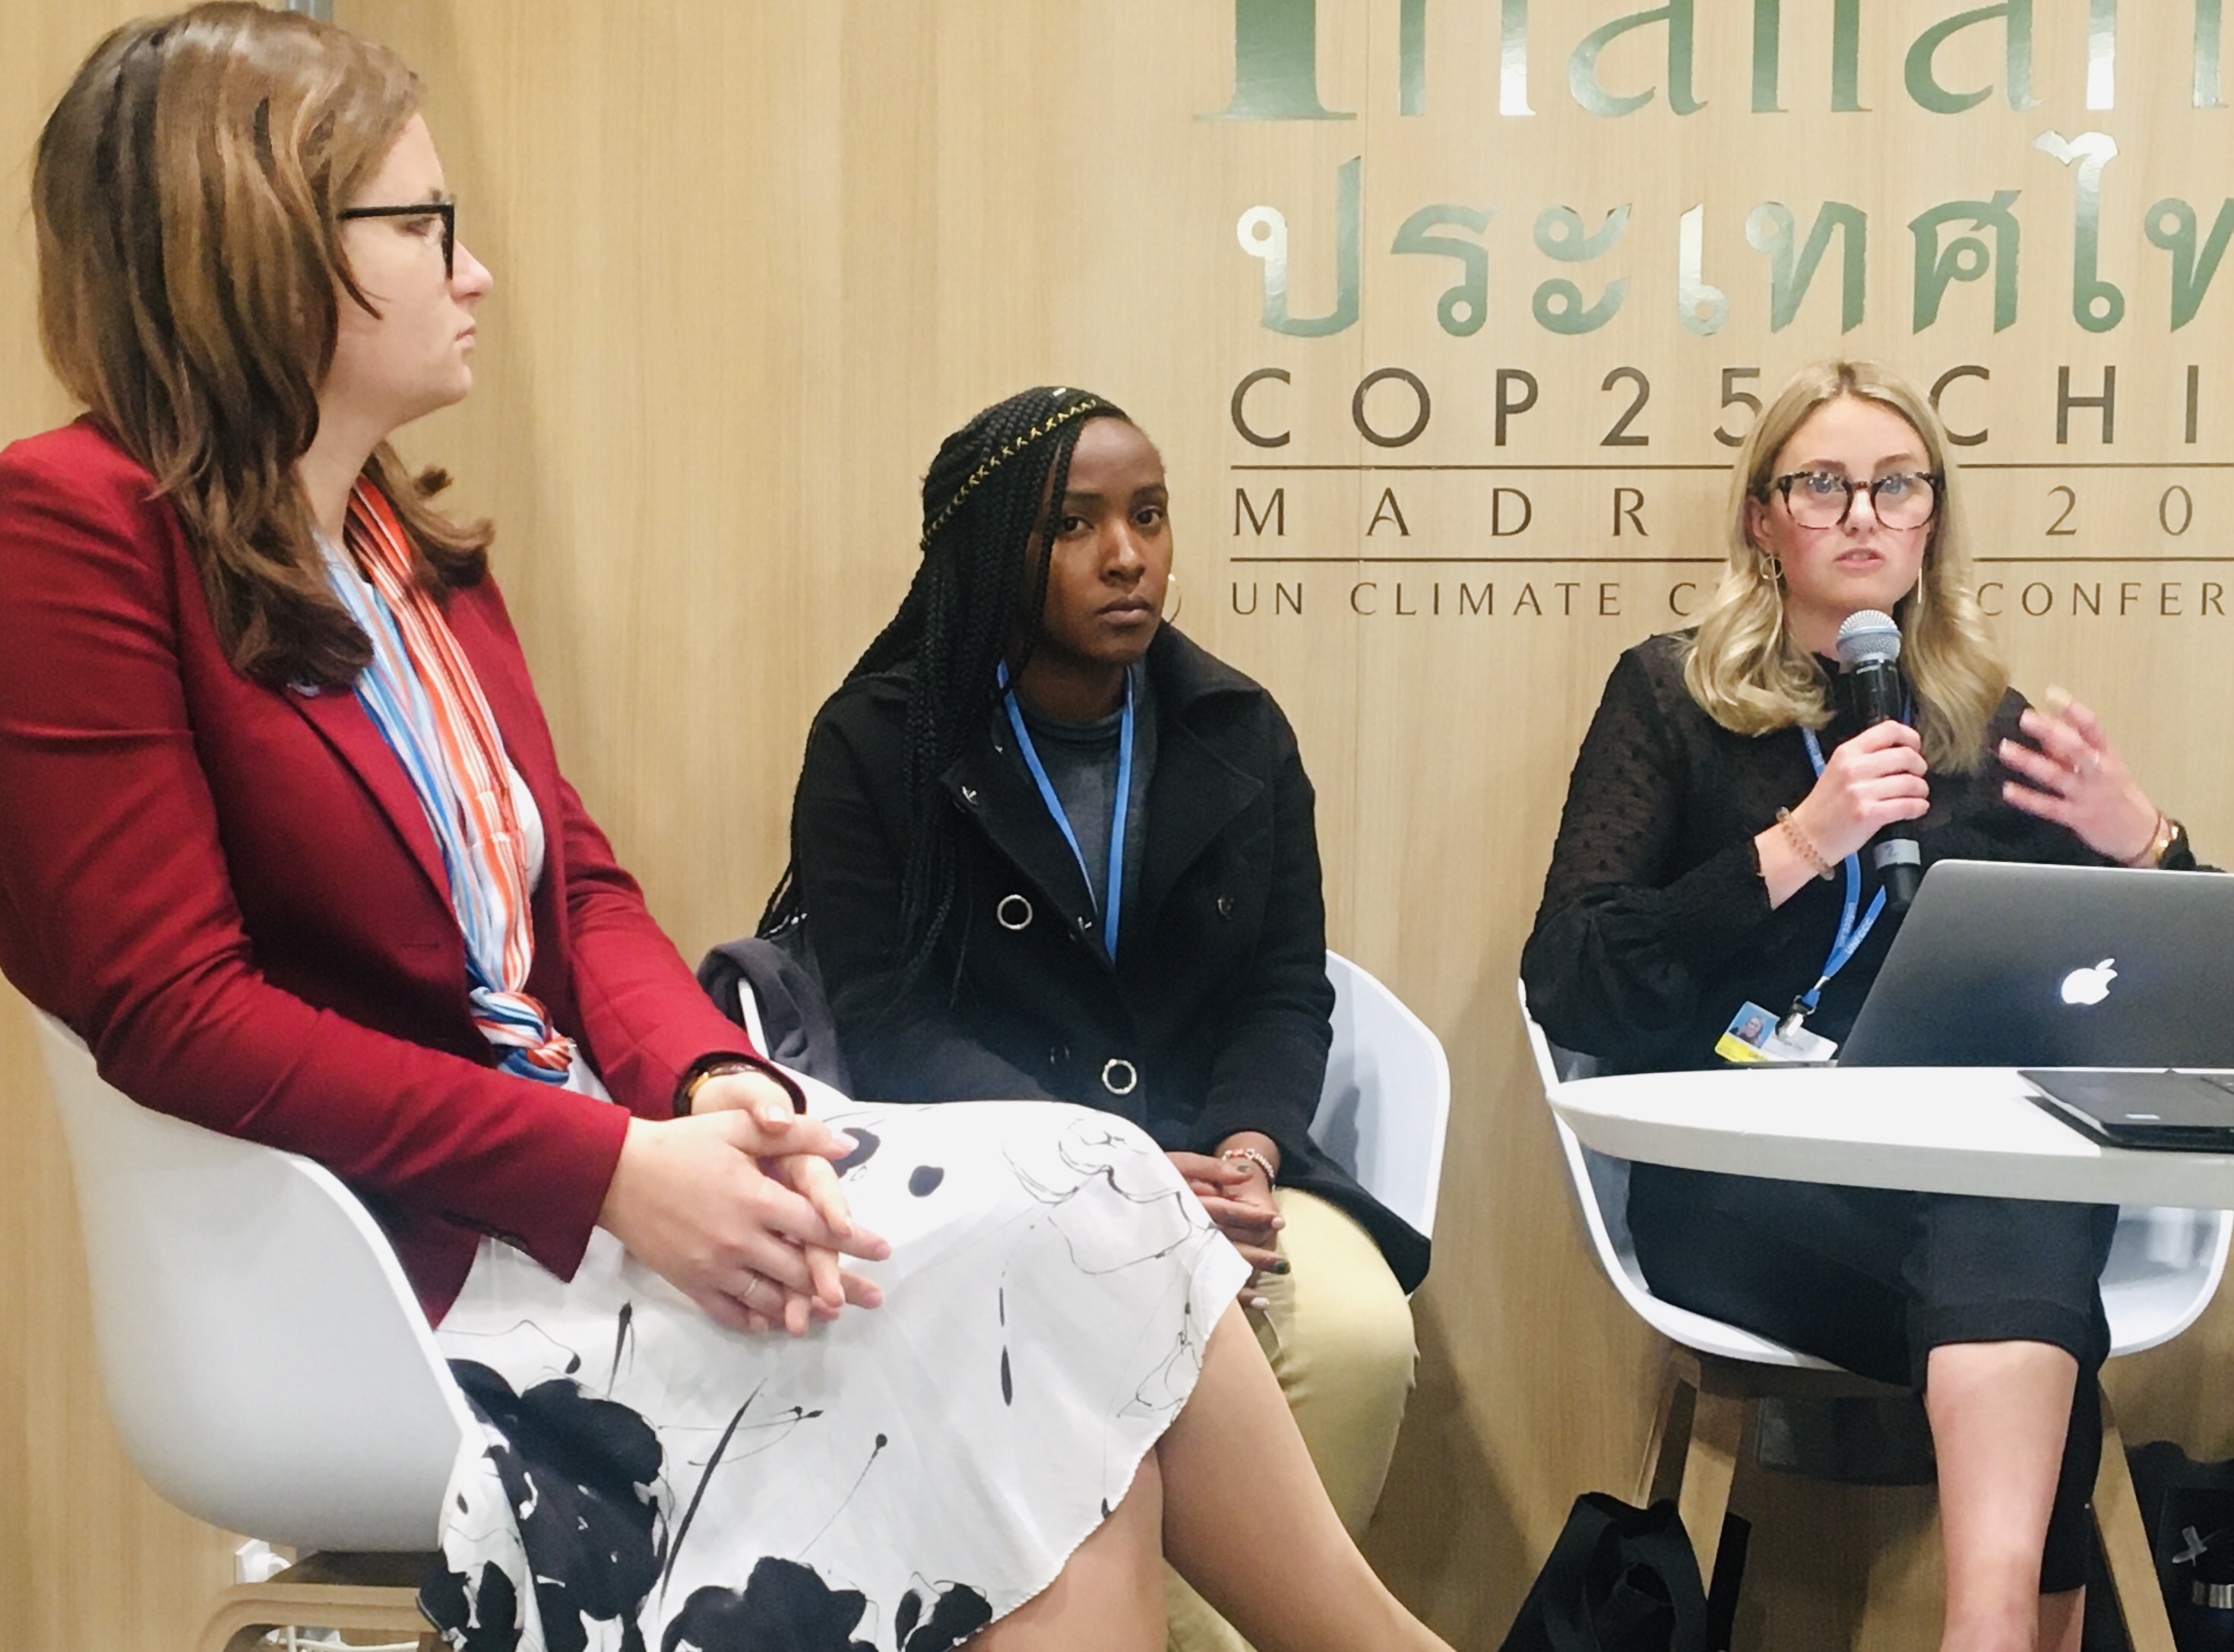 Kenyan environmentalist Elizabeth Wanjiru and other delegates speak at a panel discussion at COP25 in Madrid, Spain.